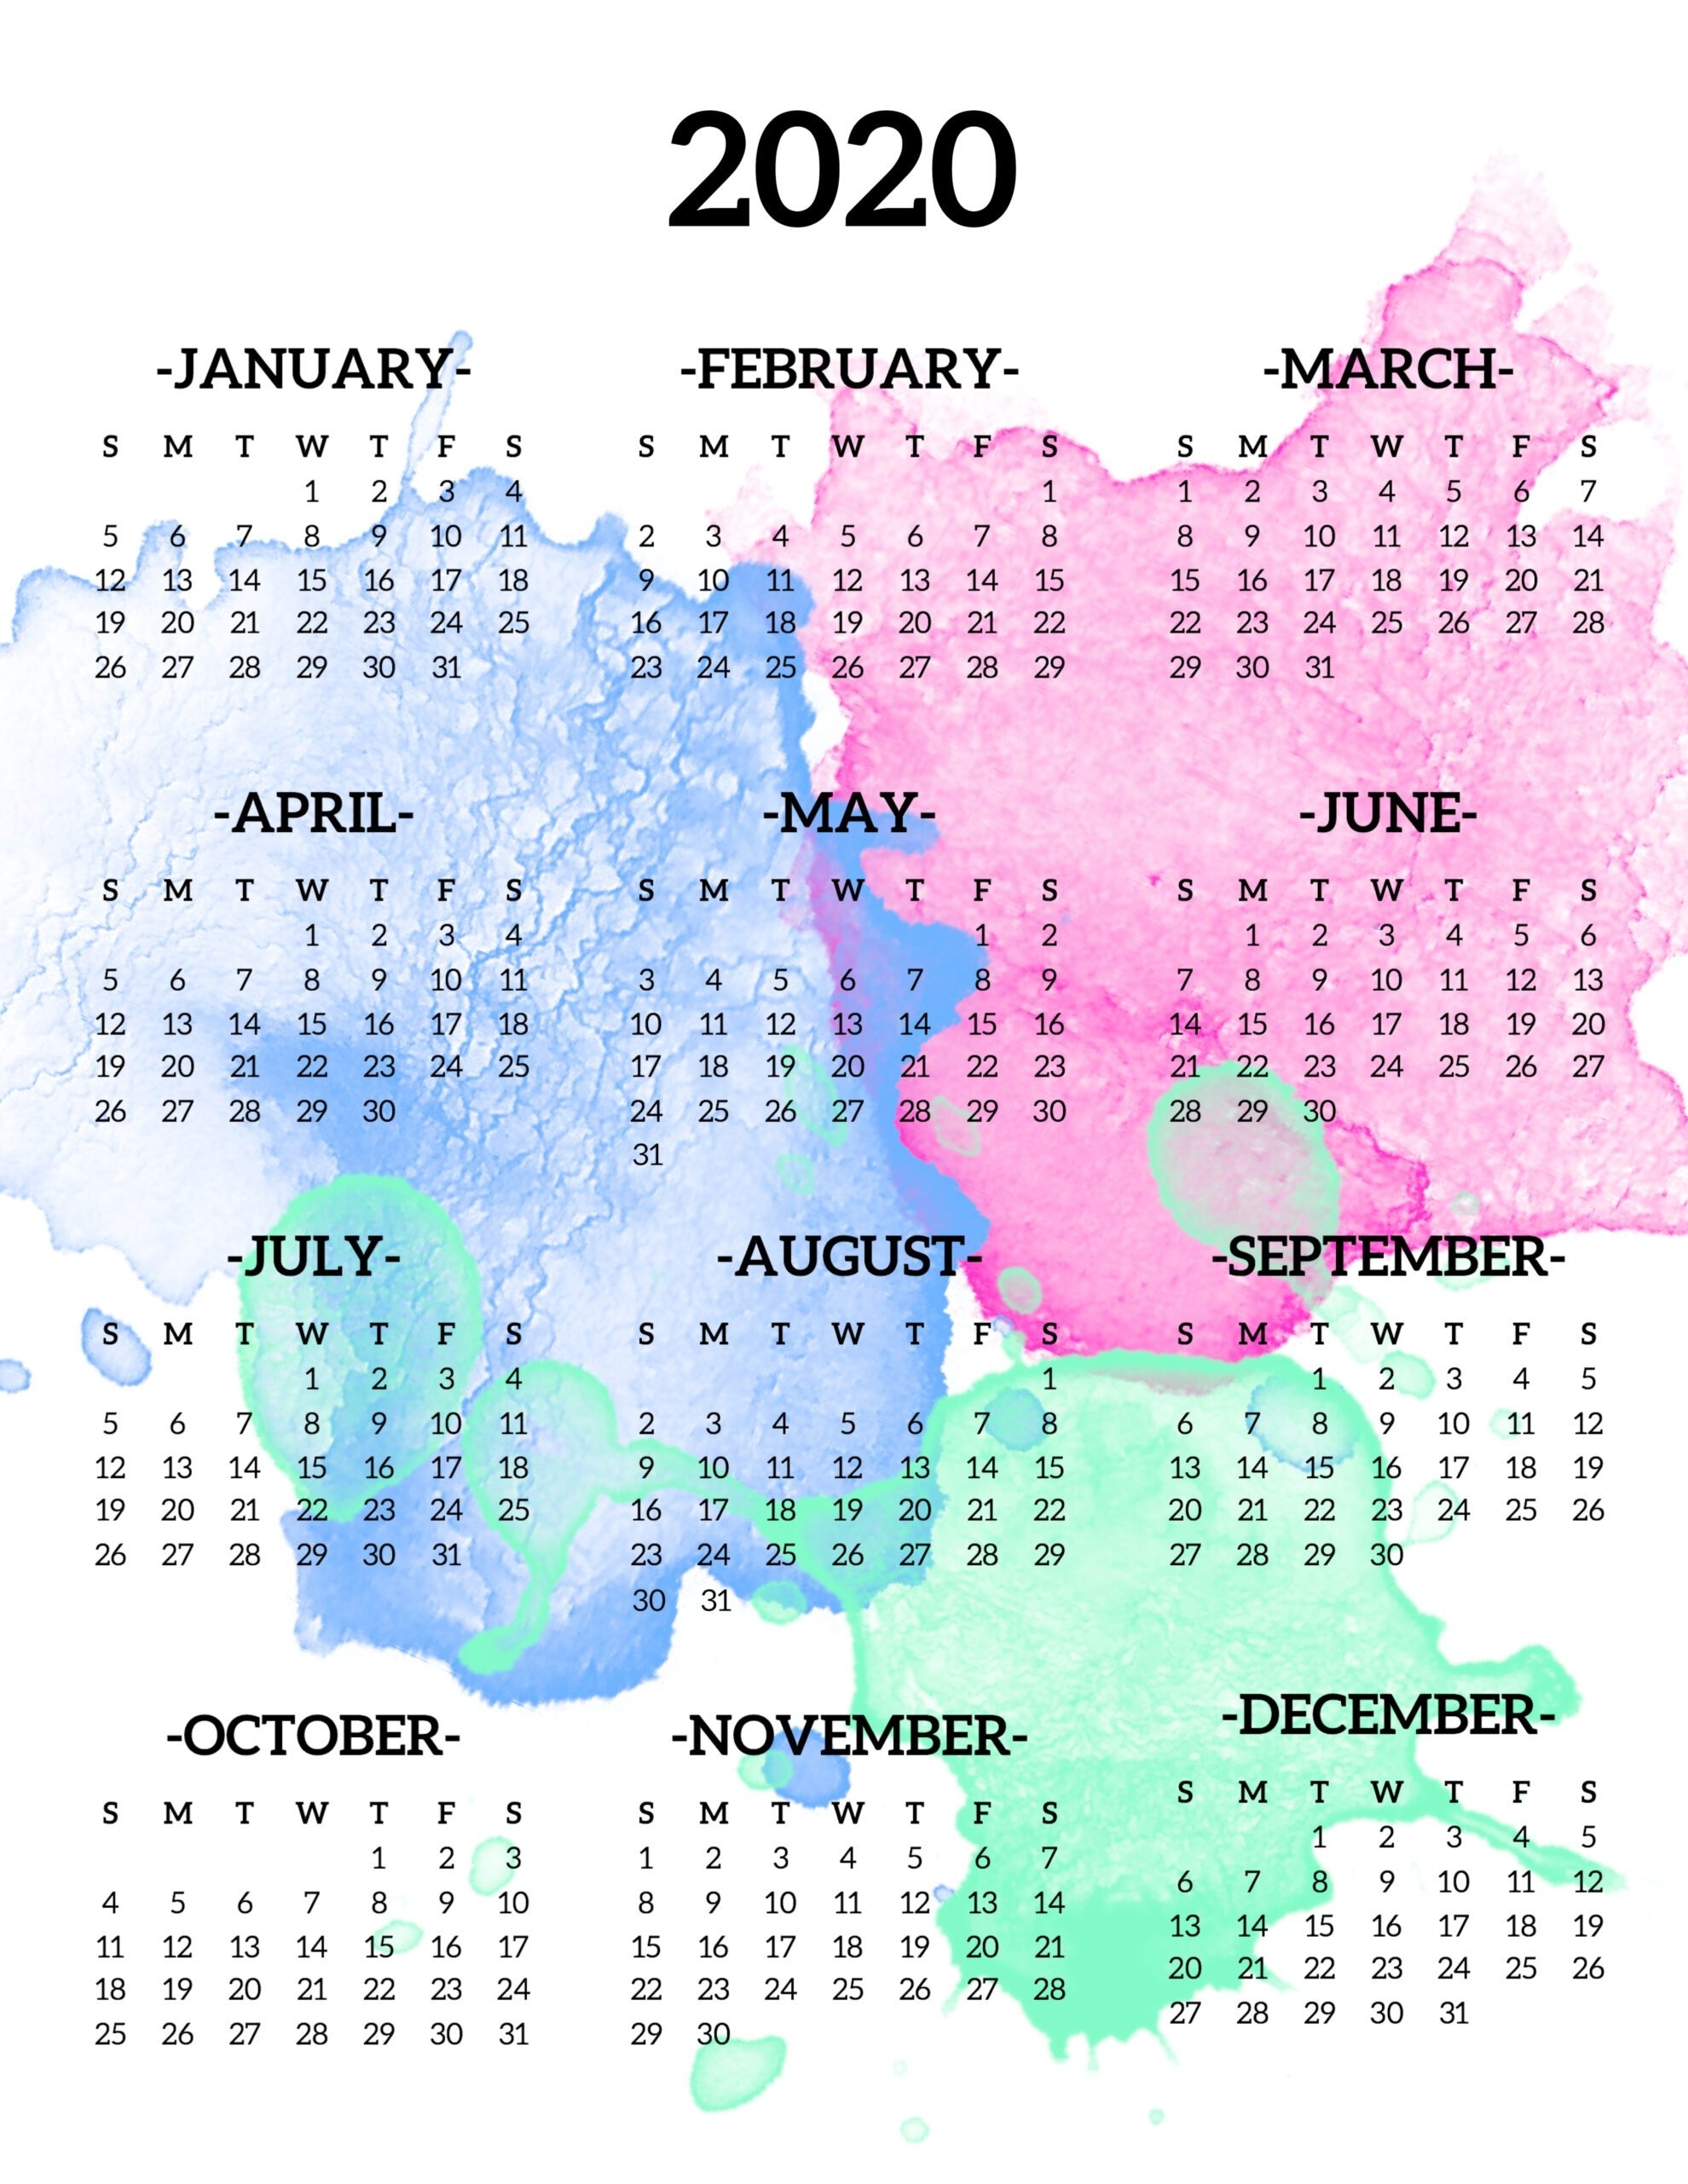 Calendar 2020 Printable One Page - Paper Trail Design within Calendar 2020 Year At A Glance Free Printable